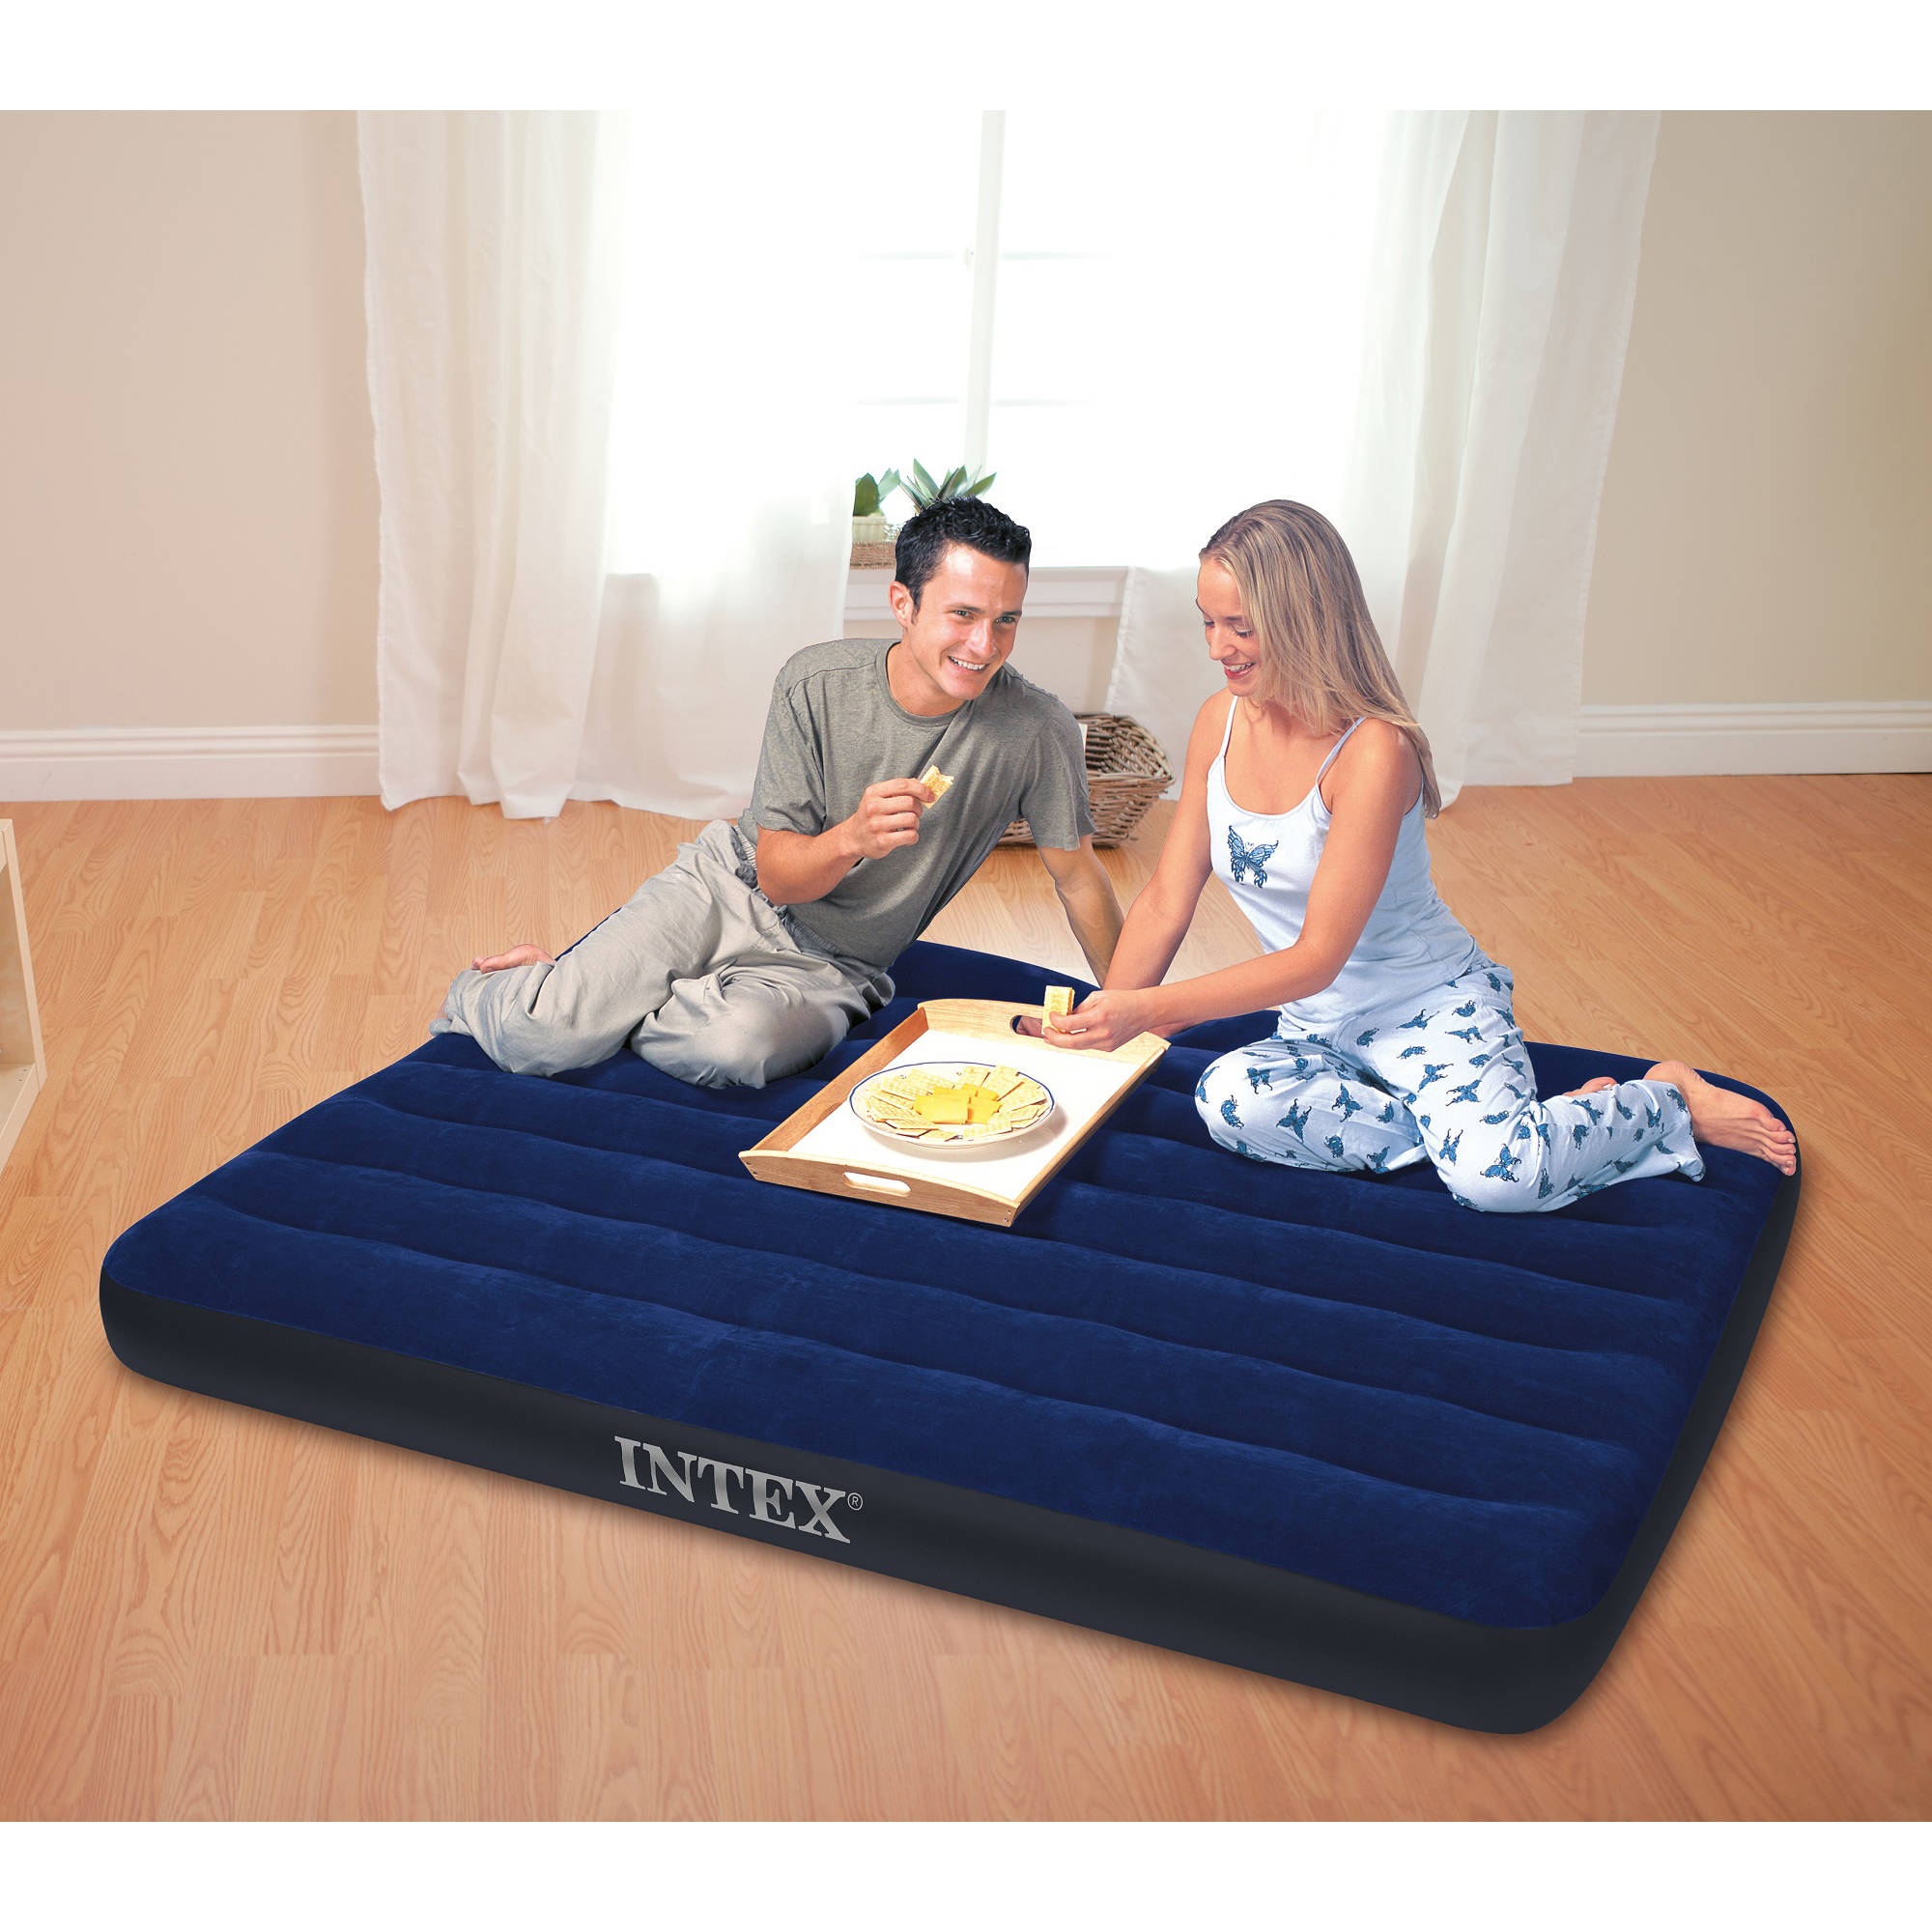 Intex Full 8.75" Classic Downy Inflatable Airbed Mattress - image 4 of 6